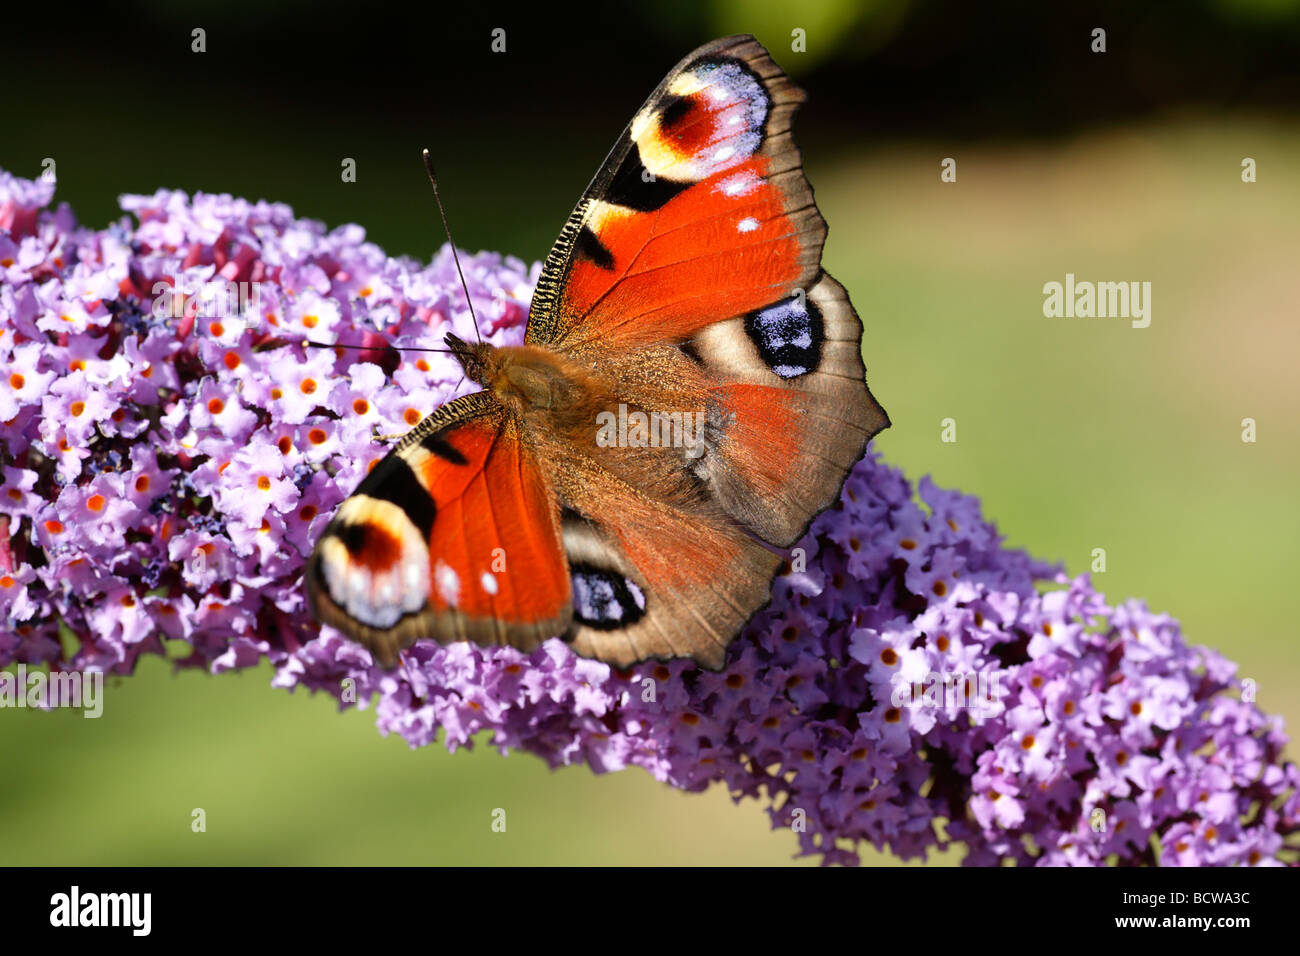 A Peacock butterfly in the garden of England, Kent, feeding in the sunshine. Stock Photo